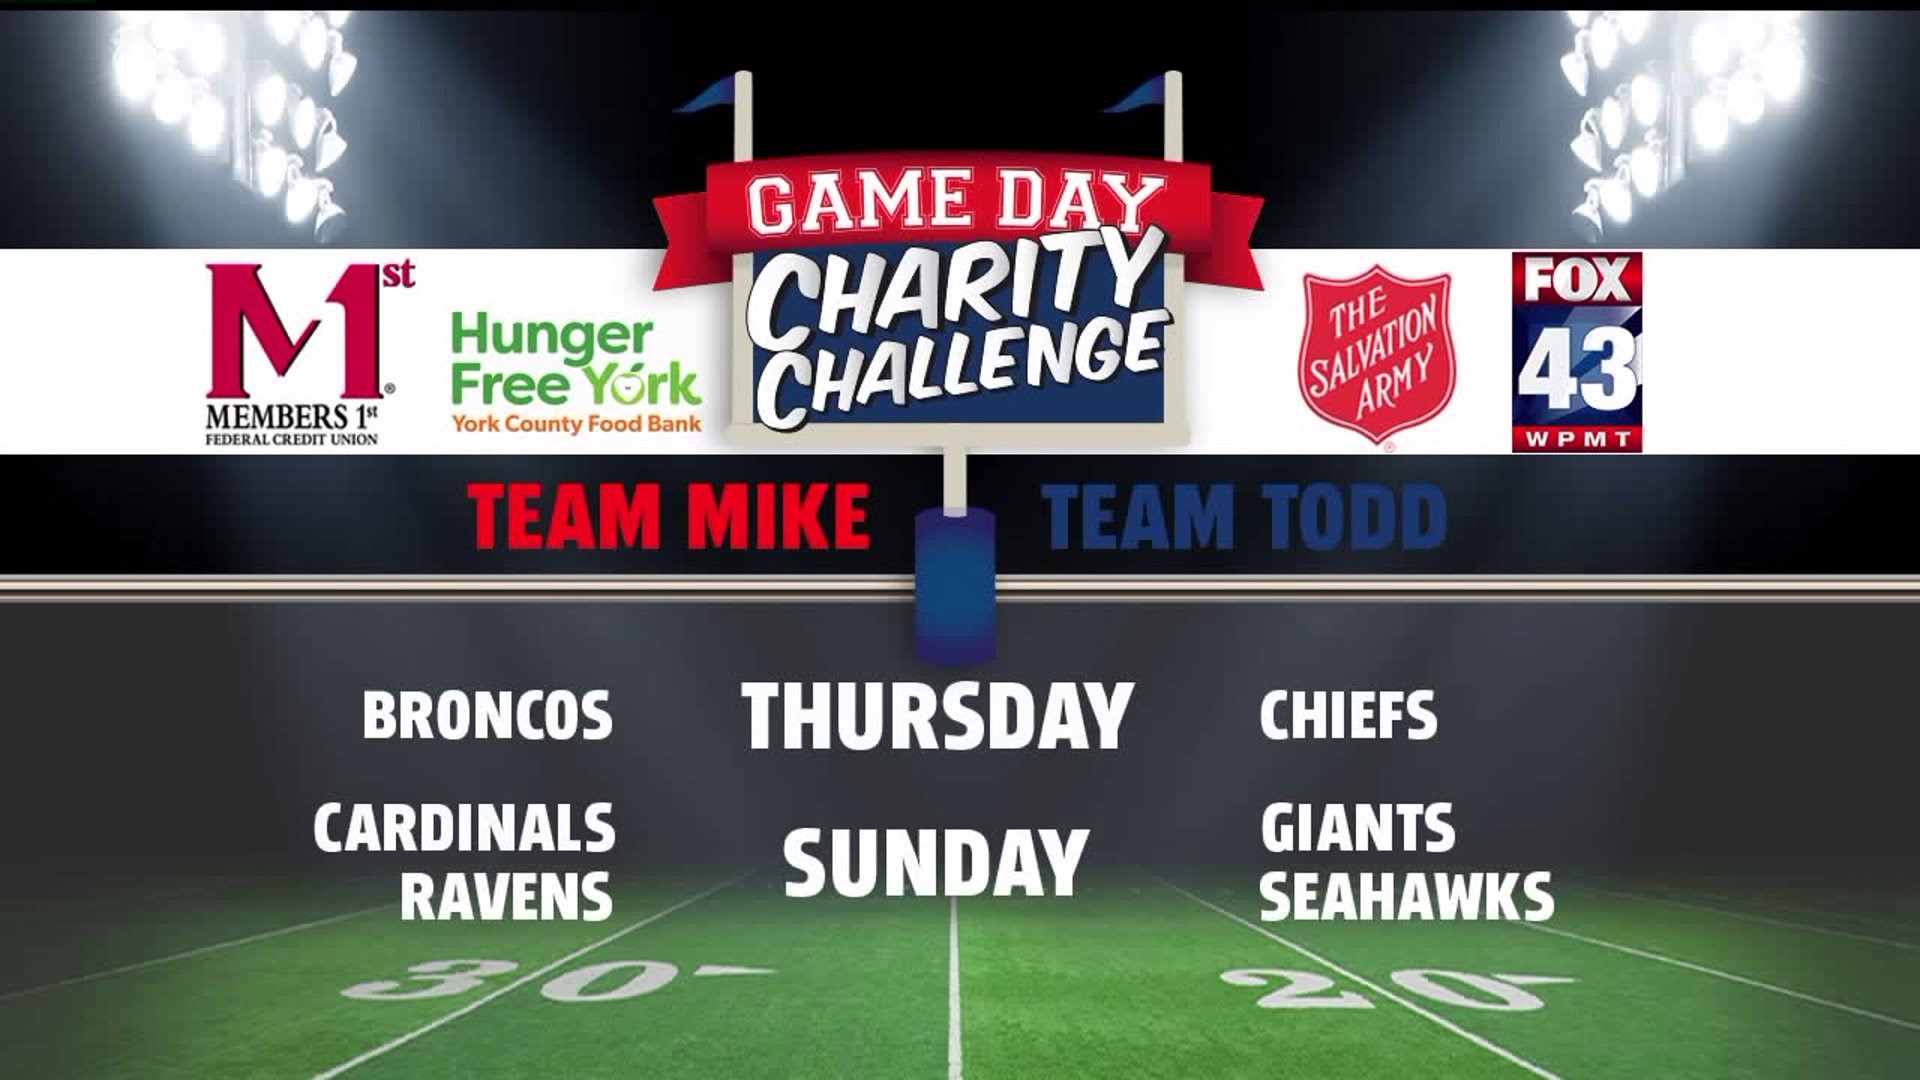 Game Day Charity Challenge - Week 4